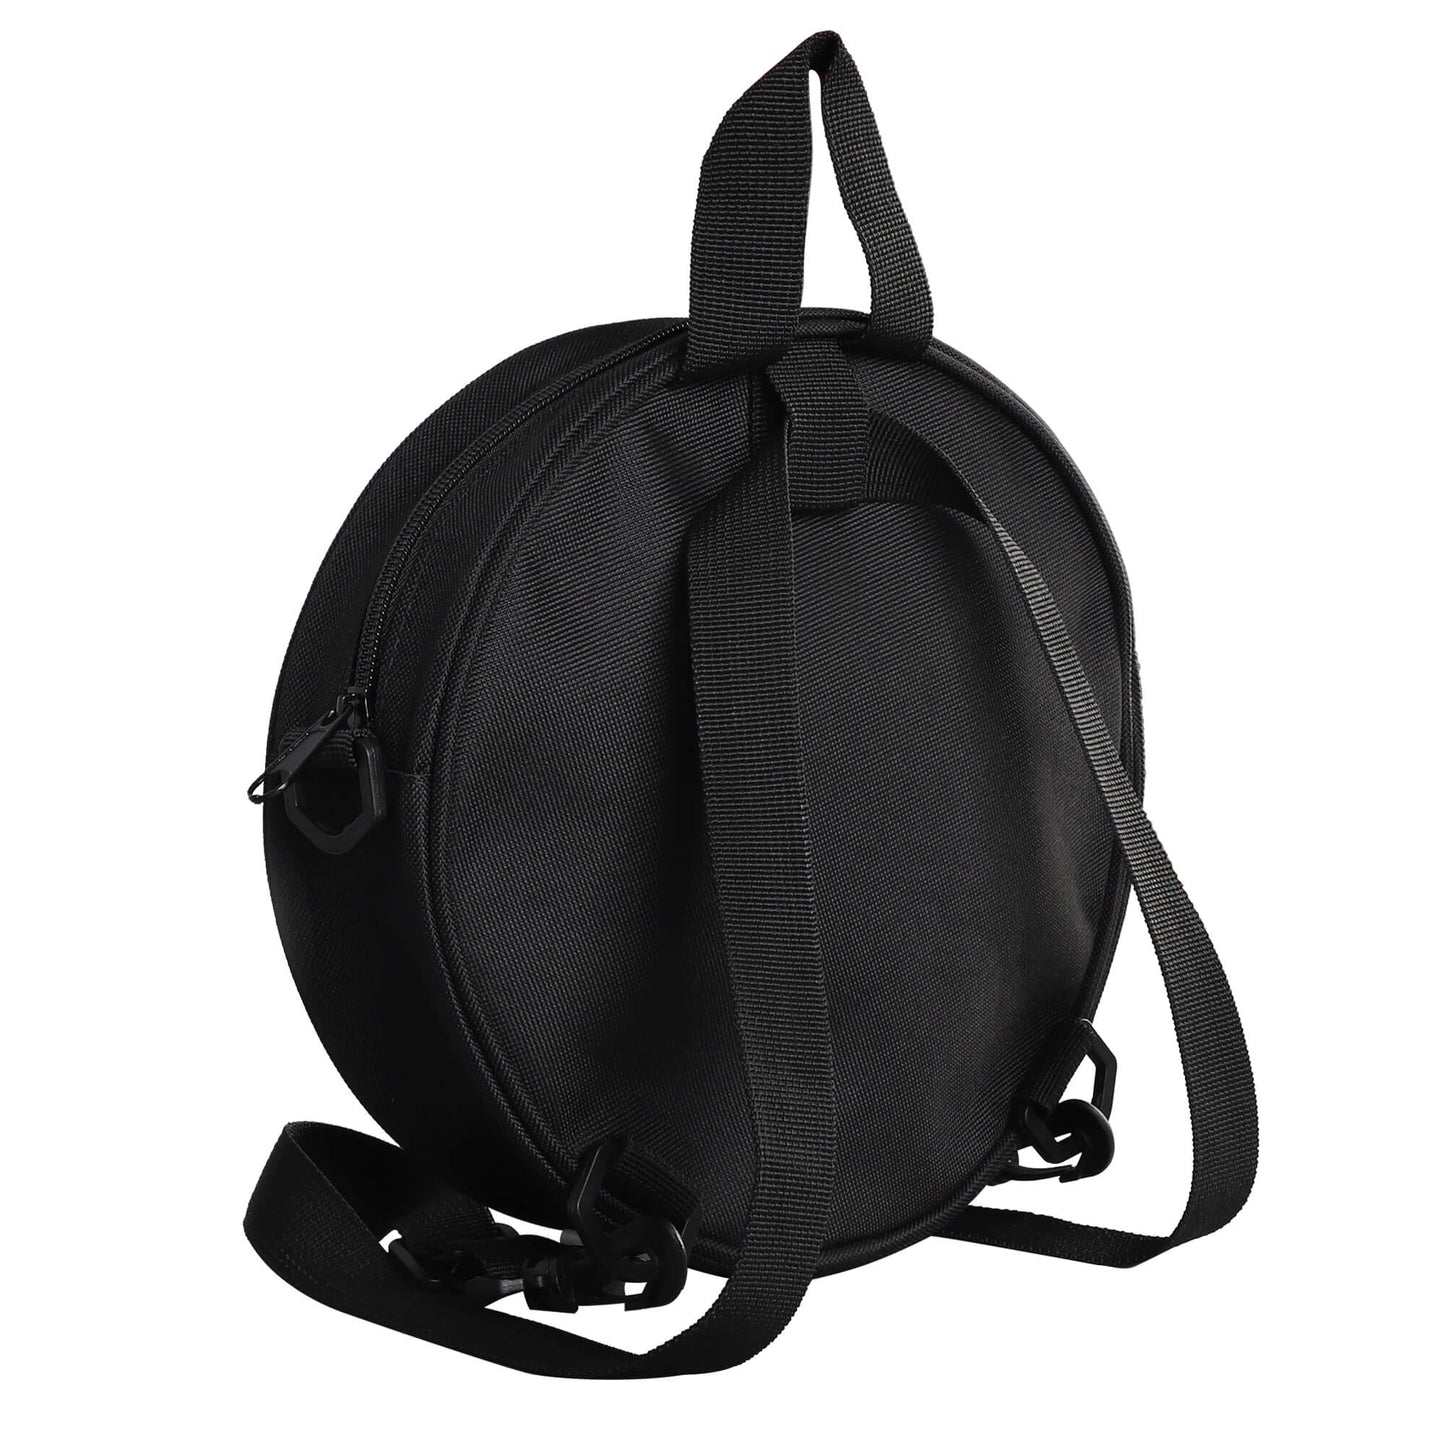 The Round Moth Satchel Bag is a stylish and sophisticated way to store your belongings. This satchel bag is made with premium quality materials that are both durable and lightweight – perfect for everyday use. 